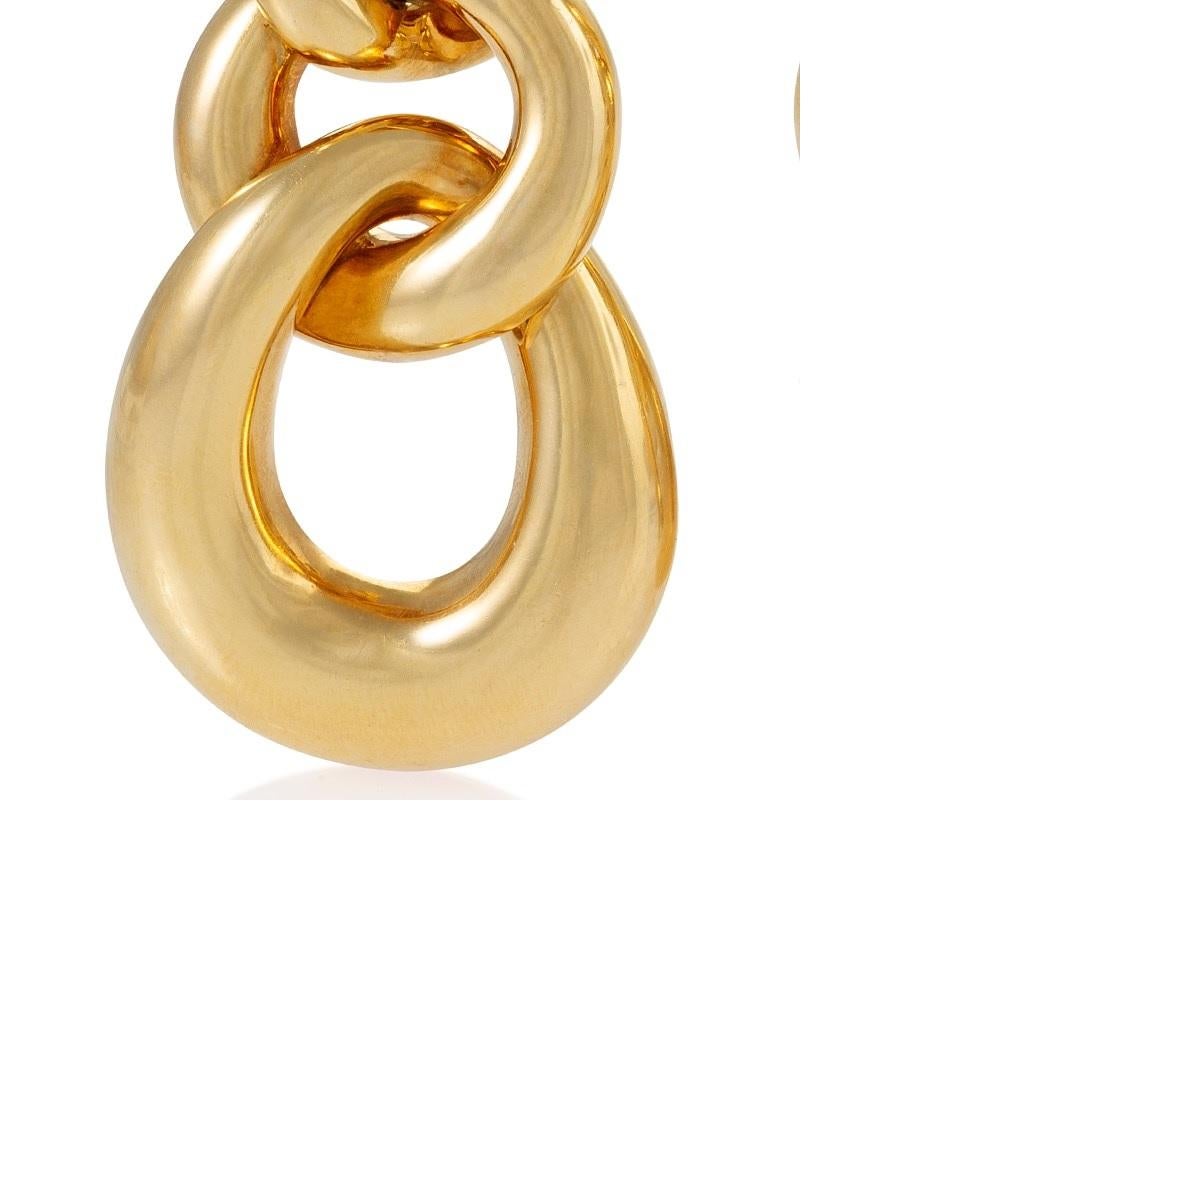 A pair of American mid-20th century 18 karat triple hoop gold earrings by David Webb. These earrings demonstrate the strength and elegance of design for which the firm is famous. The chunky gold piece is comprised of three stylized, over-sized